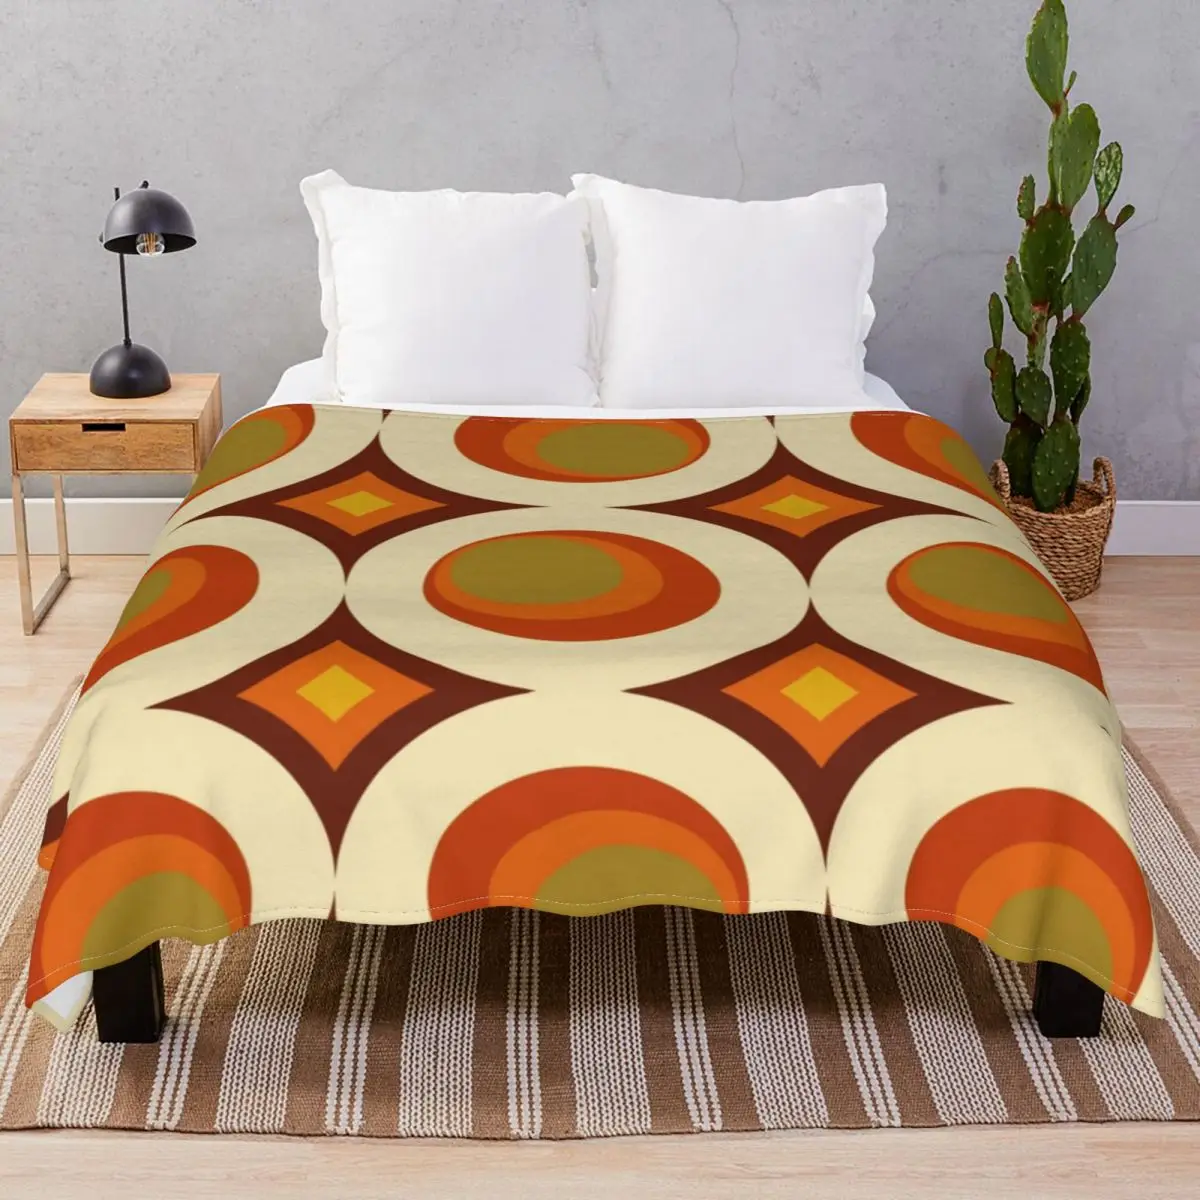 Mid-Century Modern 70s Blankets Flannel Decoration Comfortable Throw Blanket for Bedding Home Couch Camp Cinema